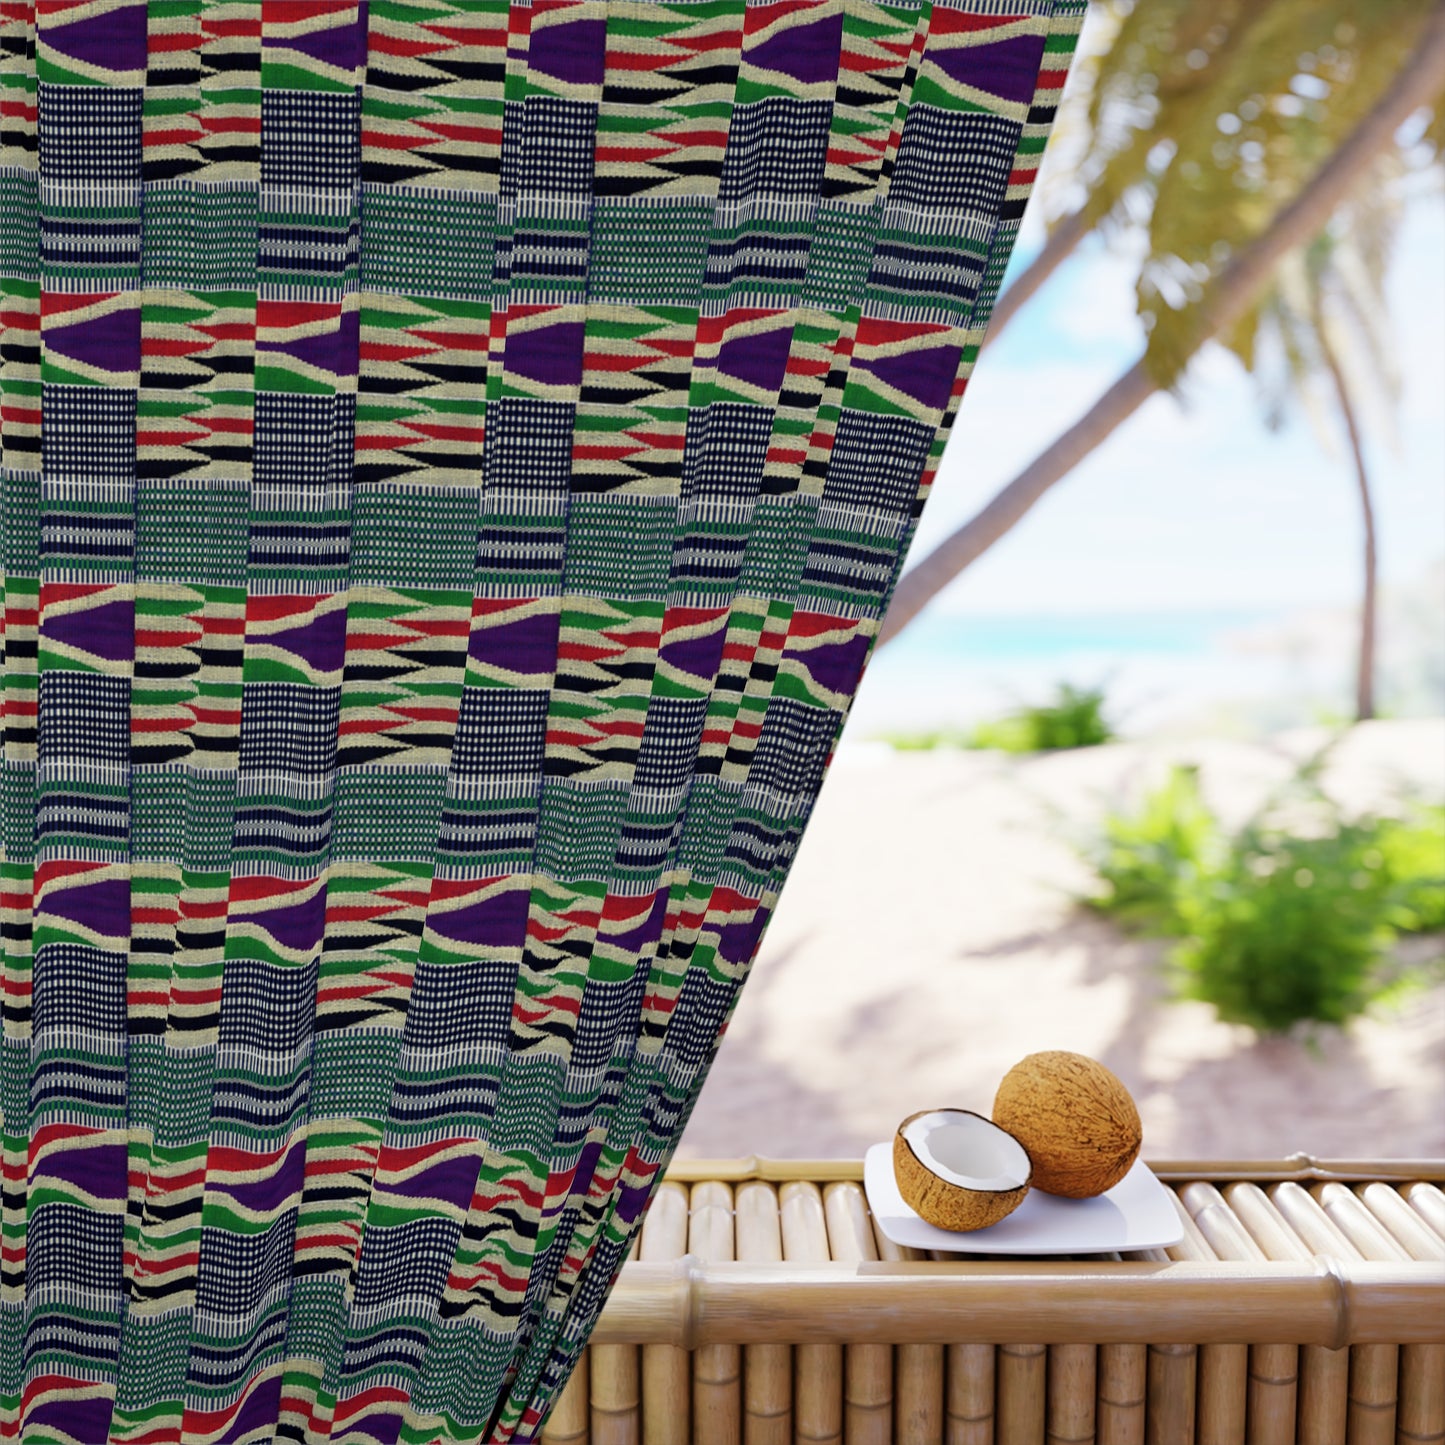 Boho Curtains in African Kente Cloth Inspired - Traditional